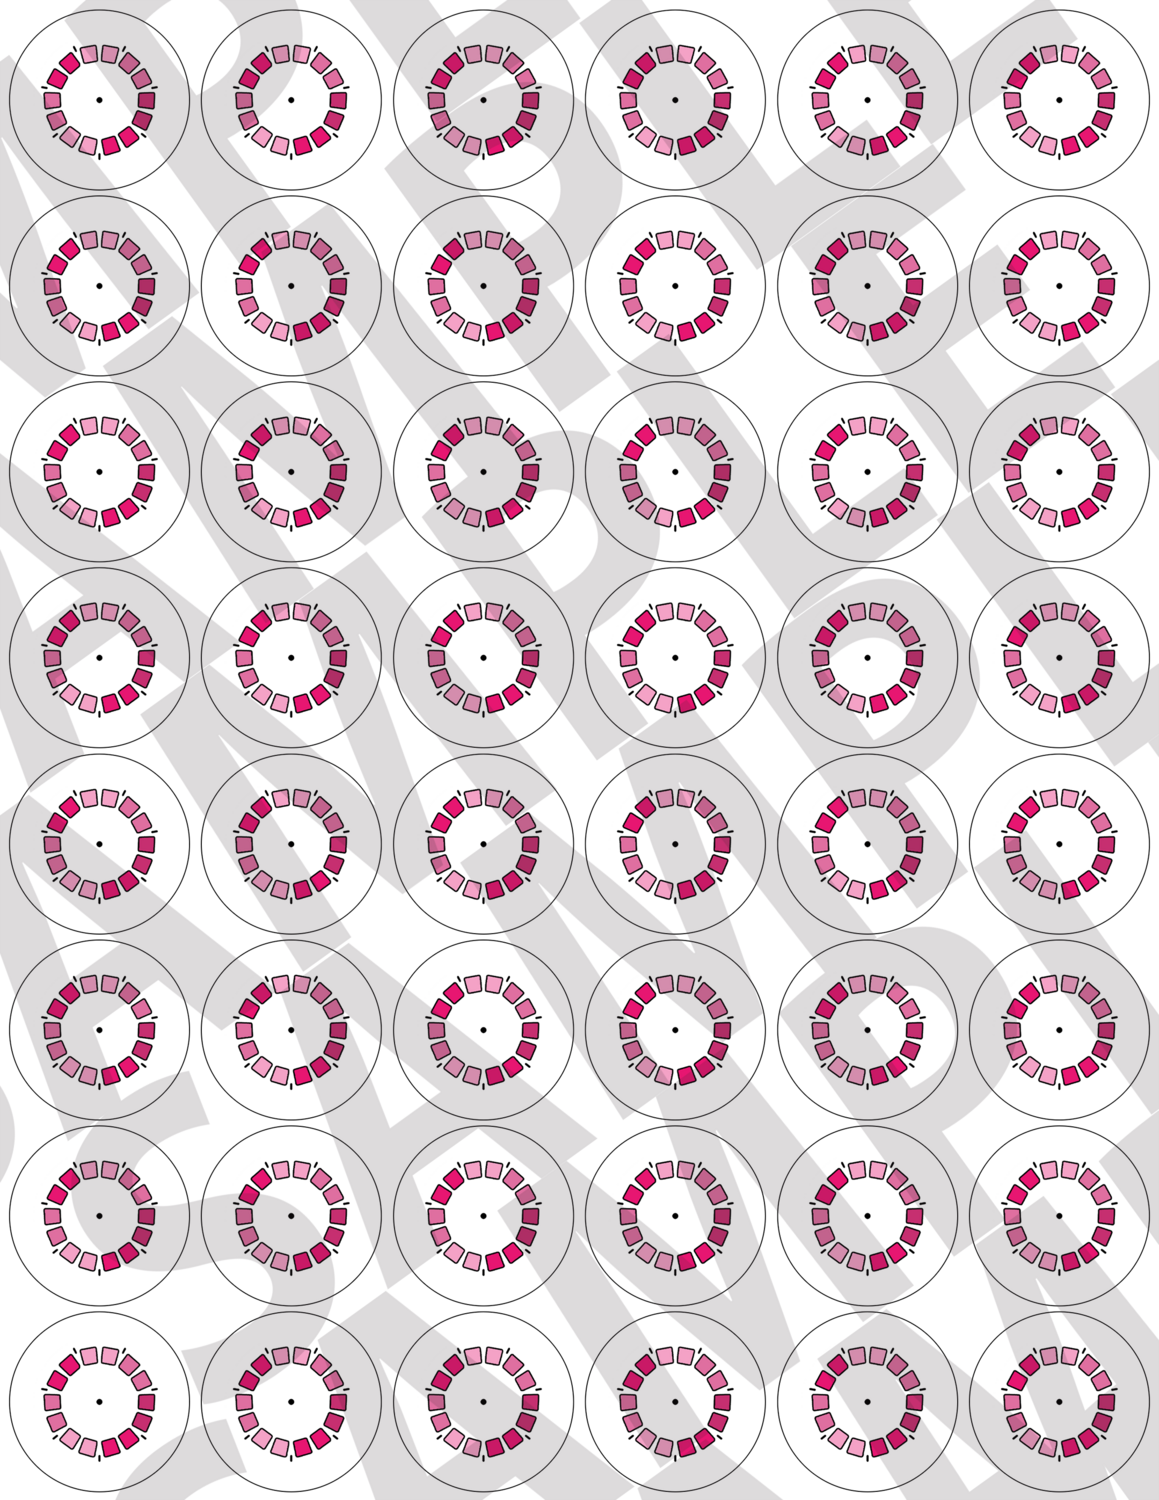 Pink - Inverted Viewfinders Button Sheet